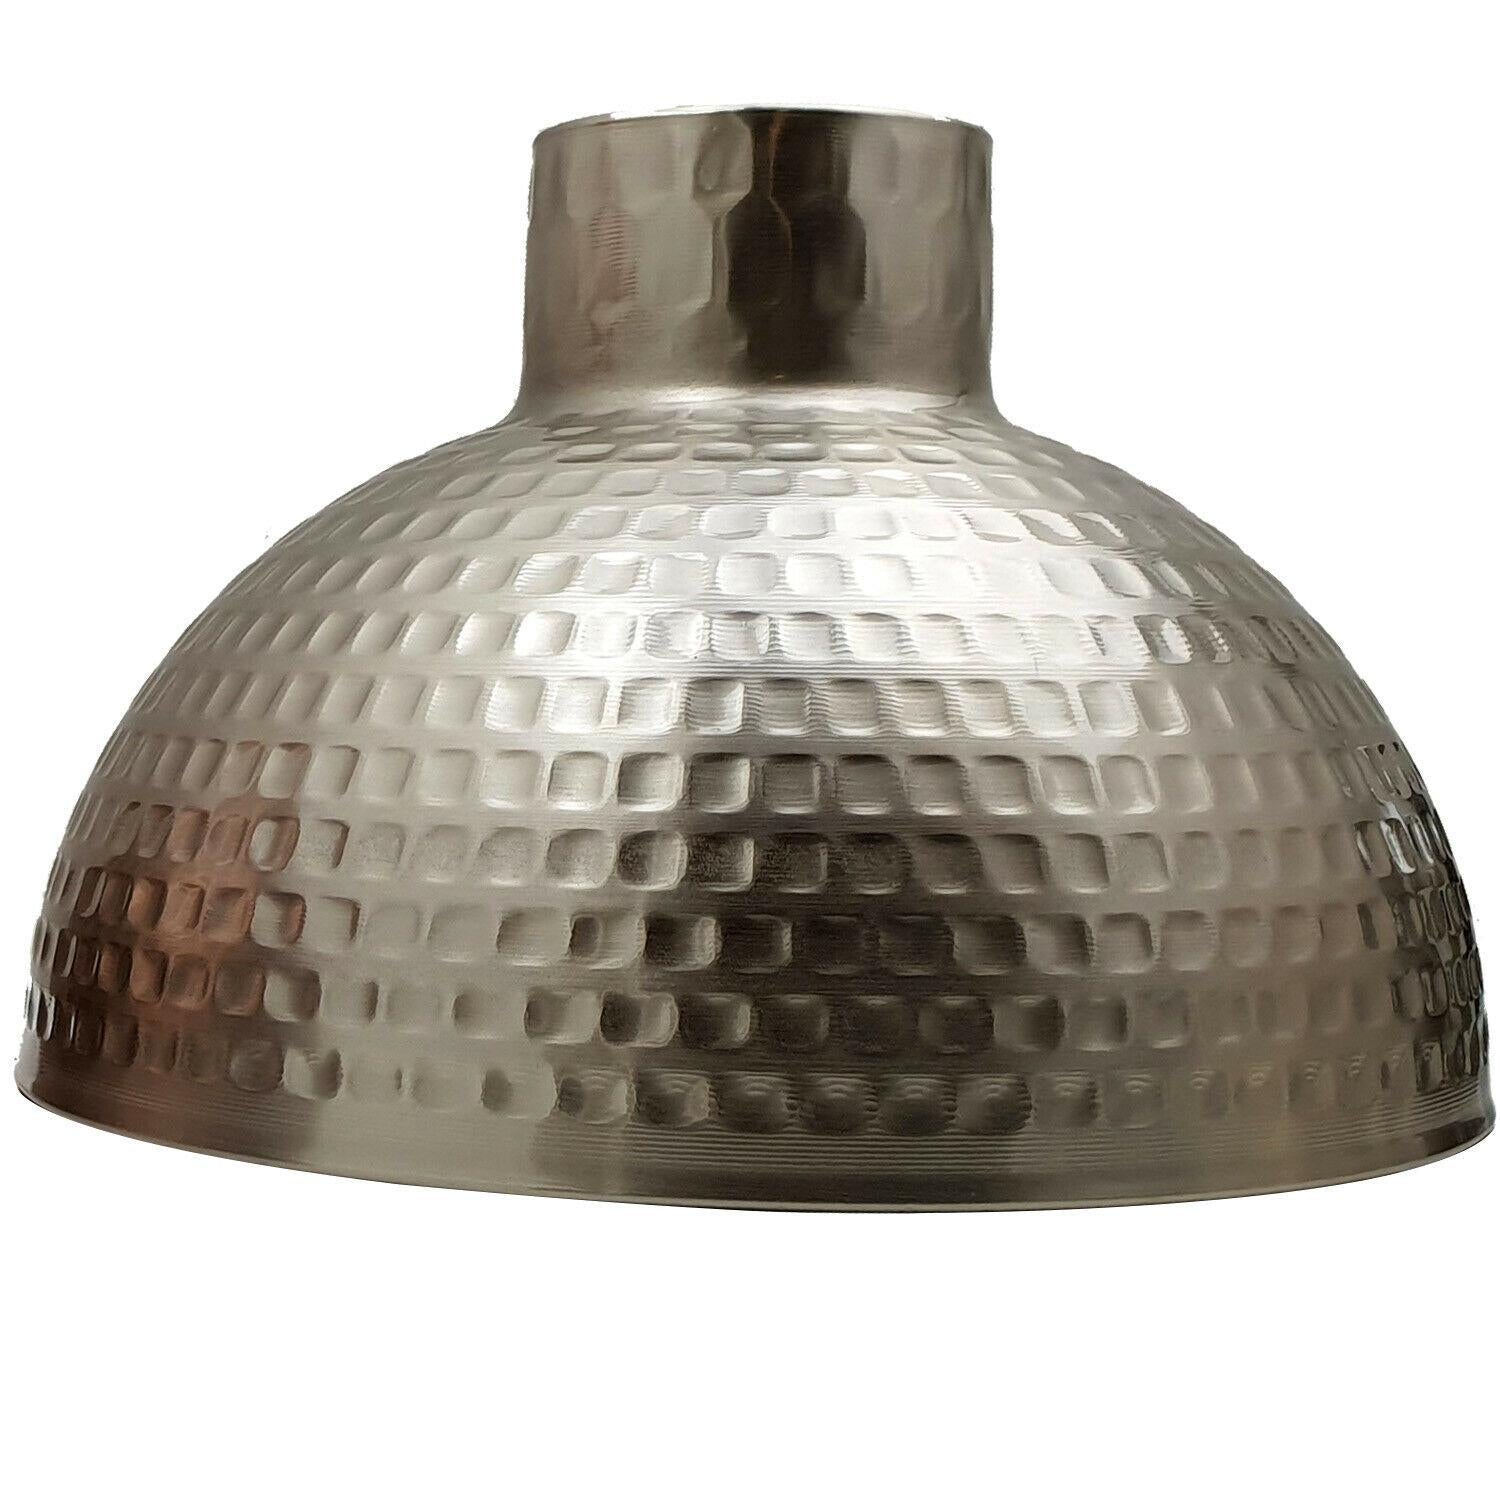 Retro Dome Light Shade Easy Fit 260mm Pendant Lampshade Fixture-Application image